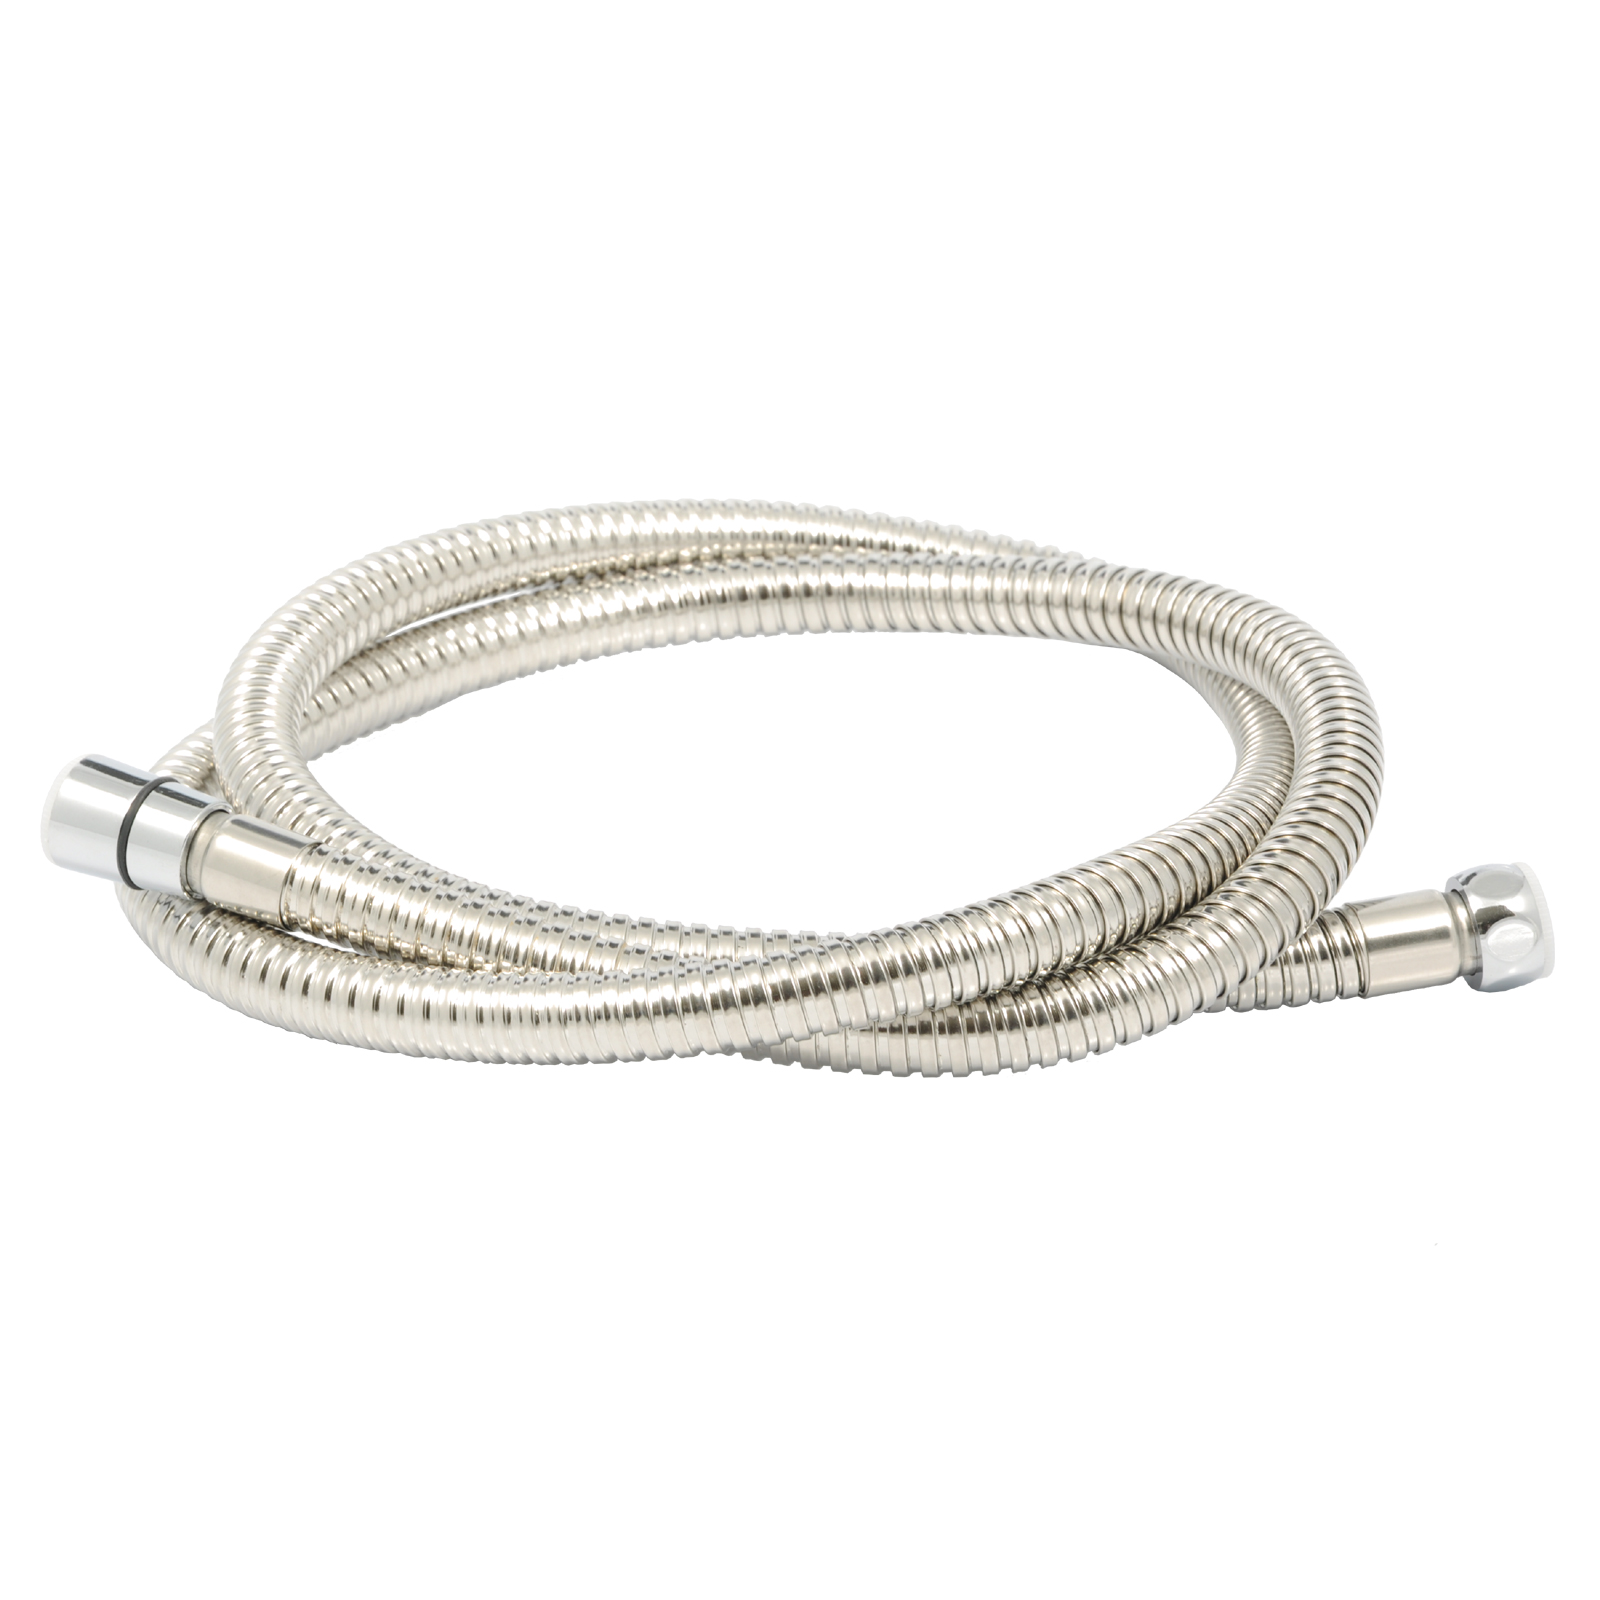 1.25m Stainless Steel Shower Hose (Large Bore)